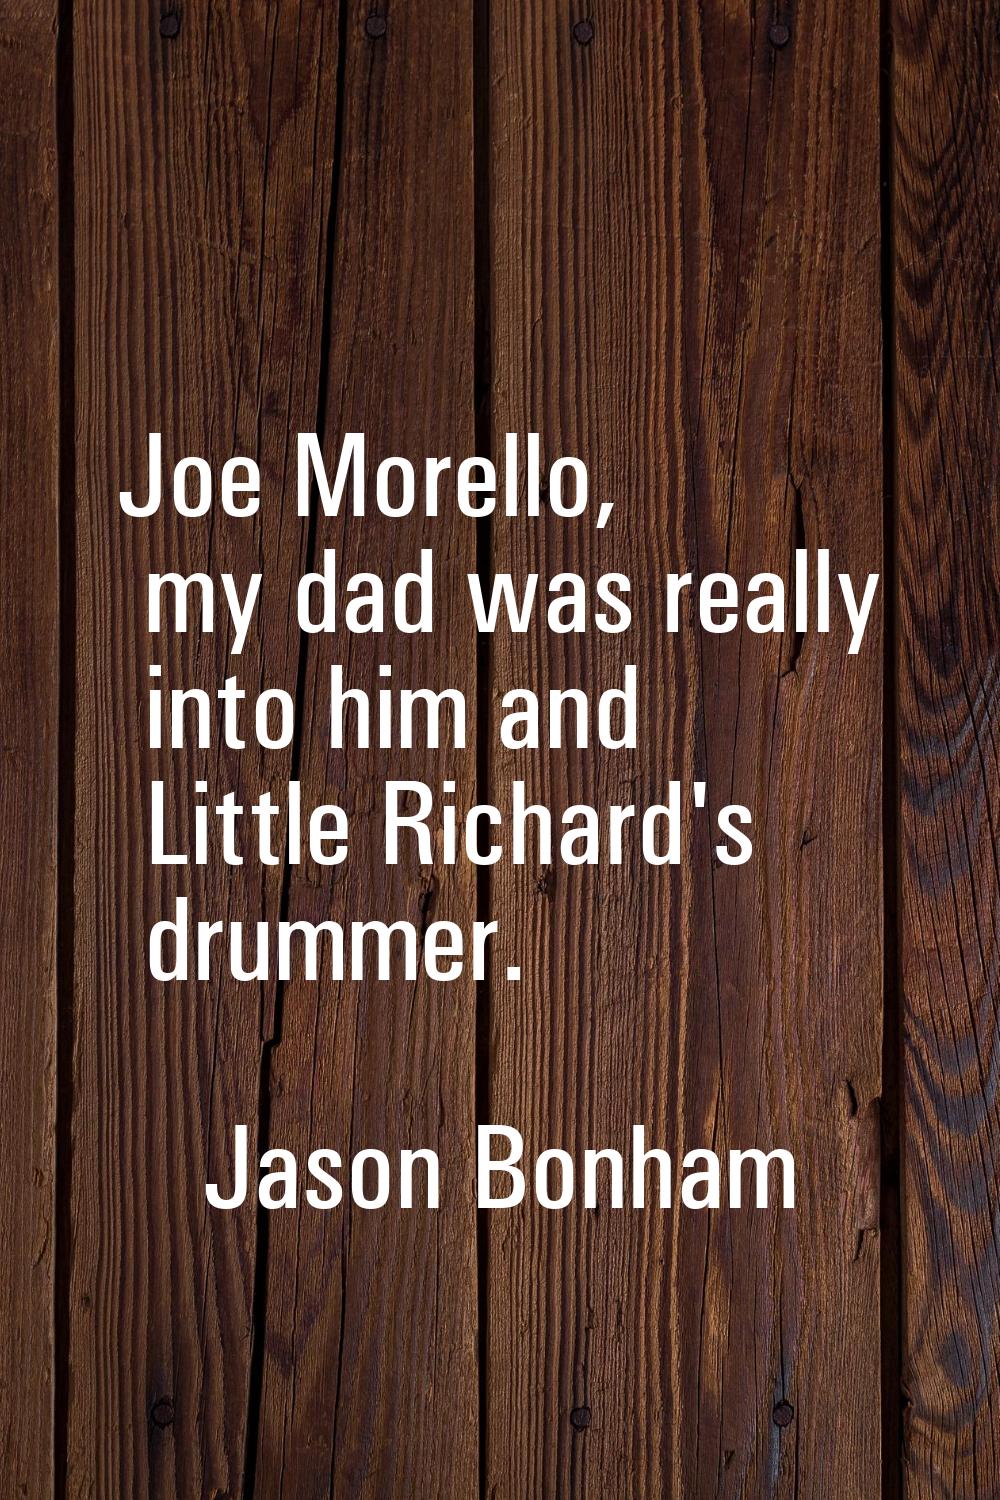 Joe Morello, my dad was really into him and Little Richard's drummer.